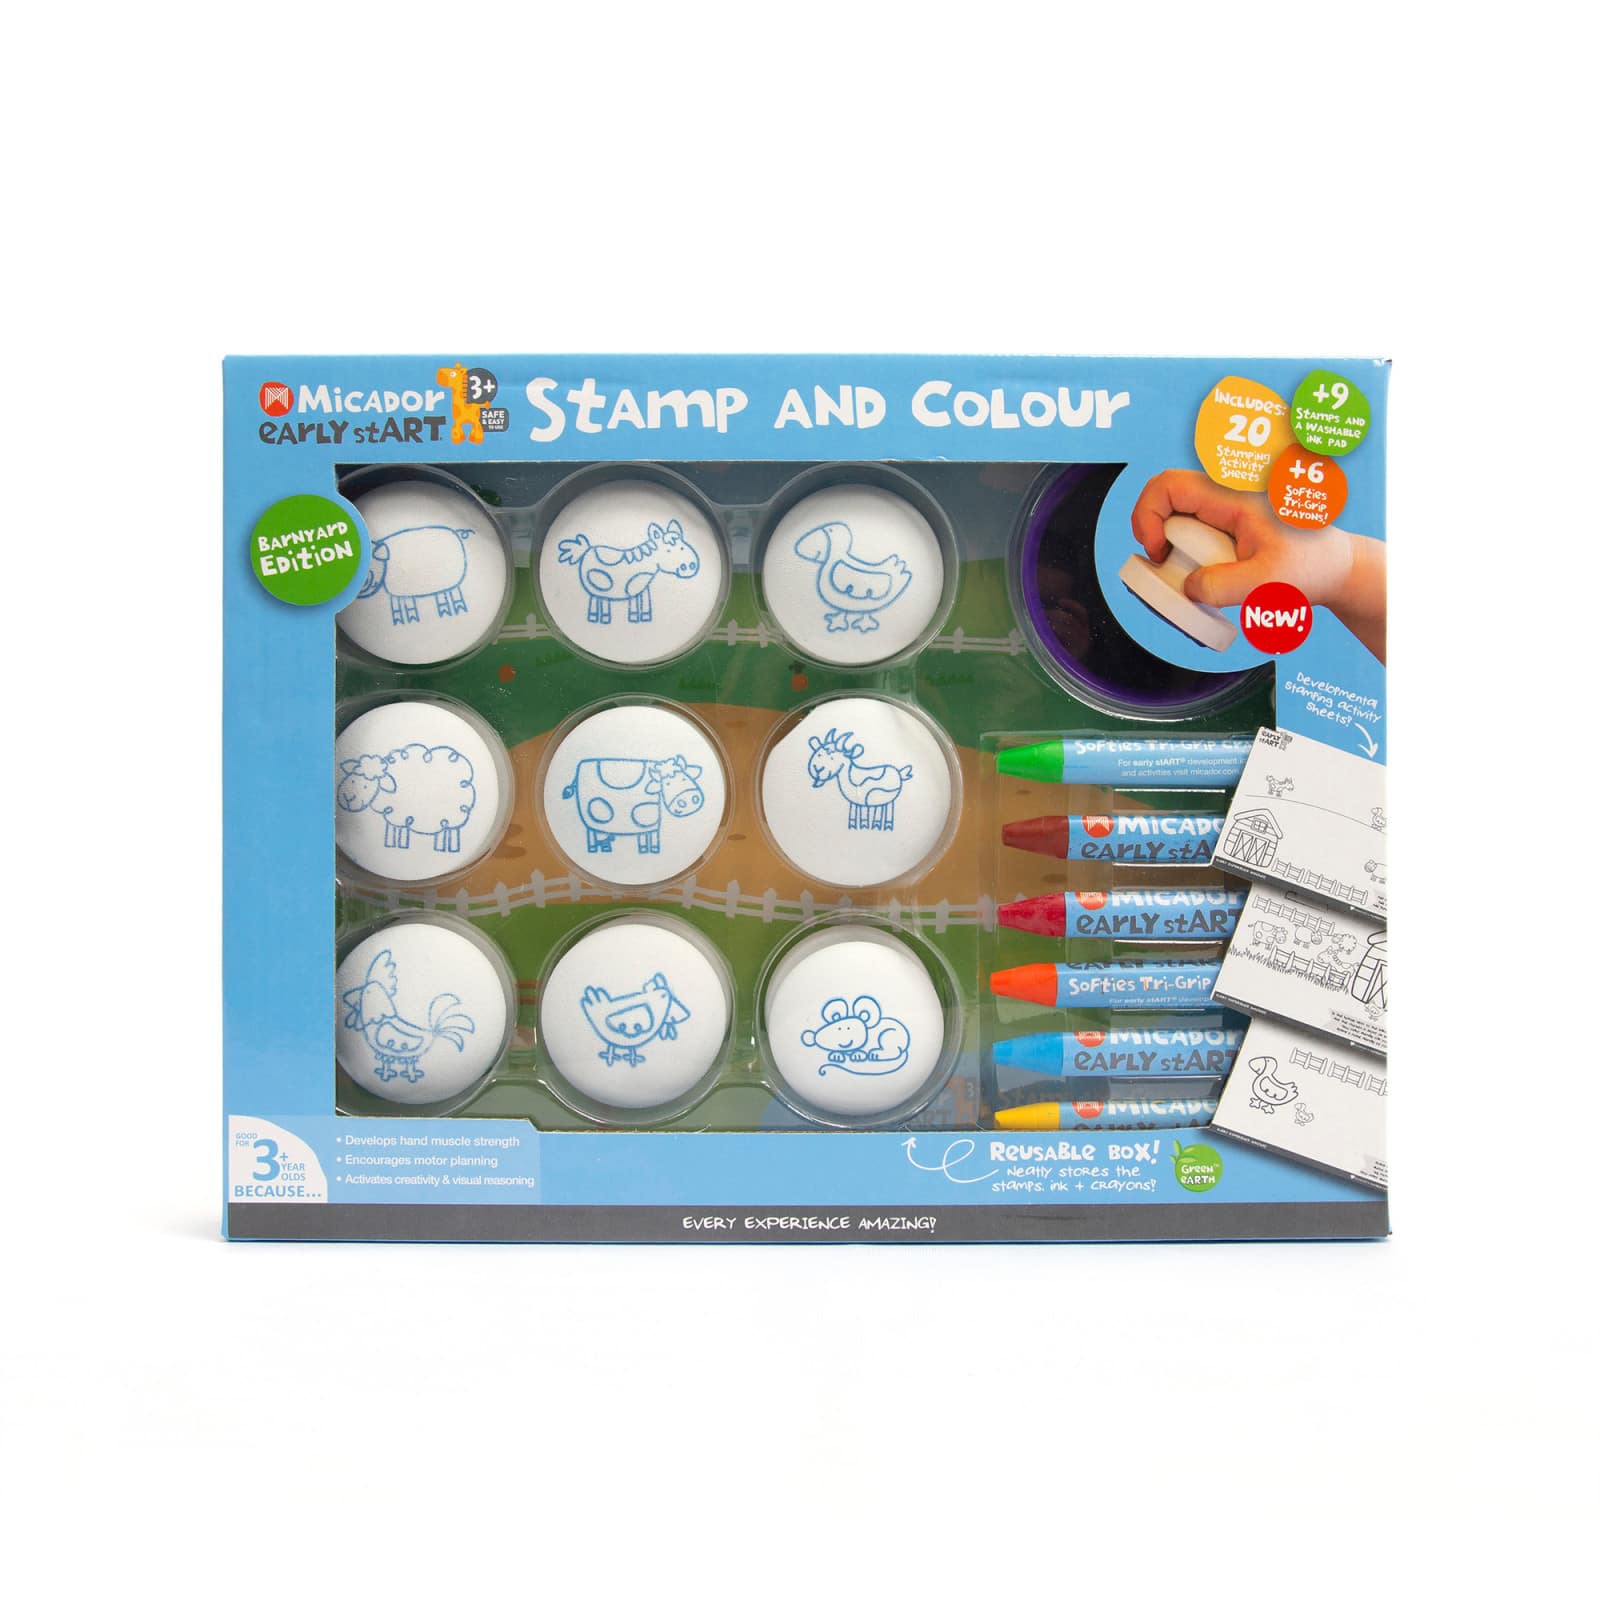 6 Pack: Micador&#xAE; early stART&#xAE; Stamp &#x26; Colour Barnyard Pack